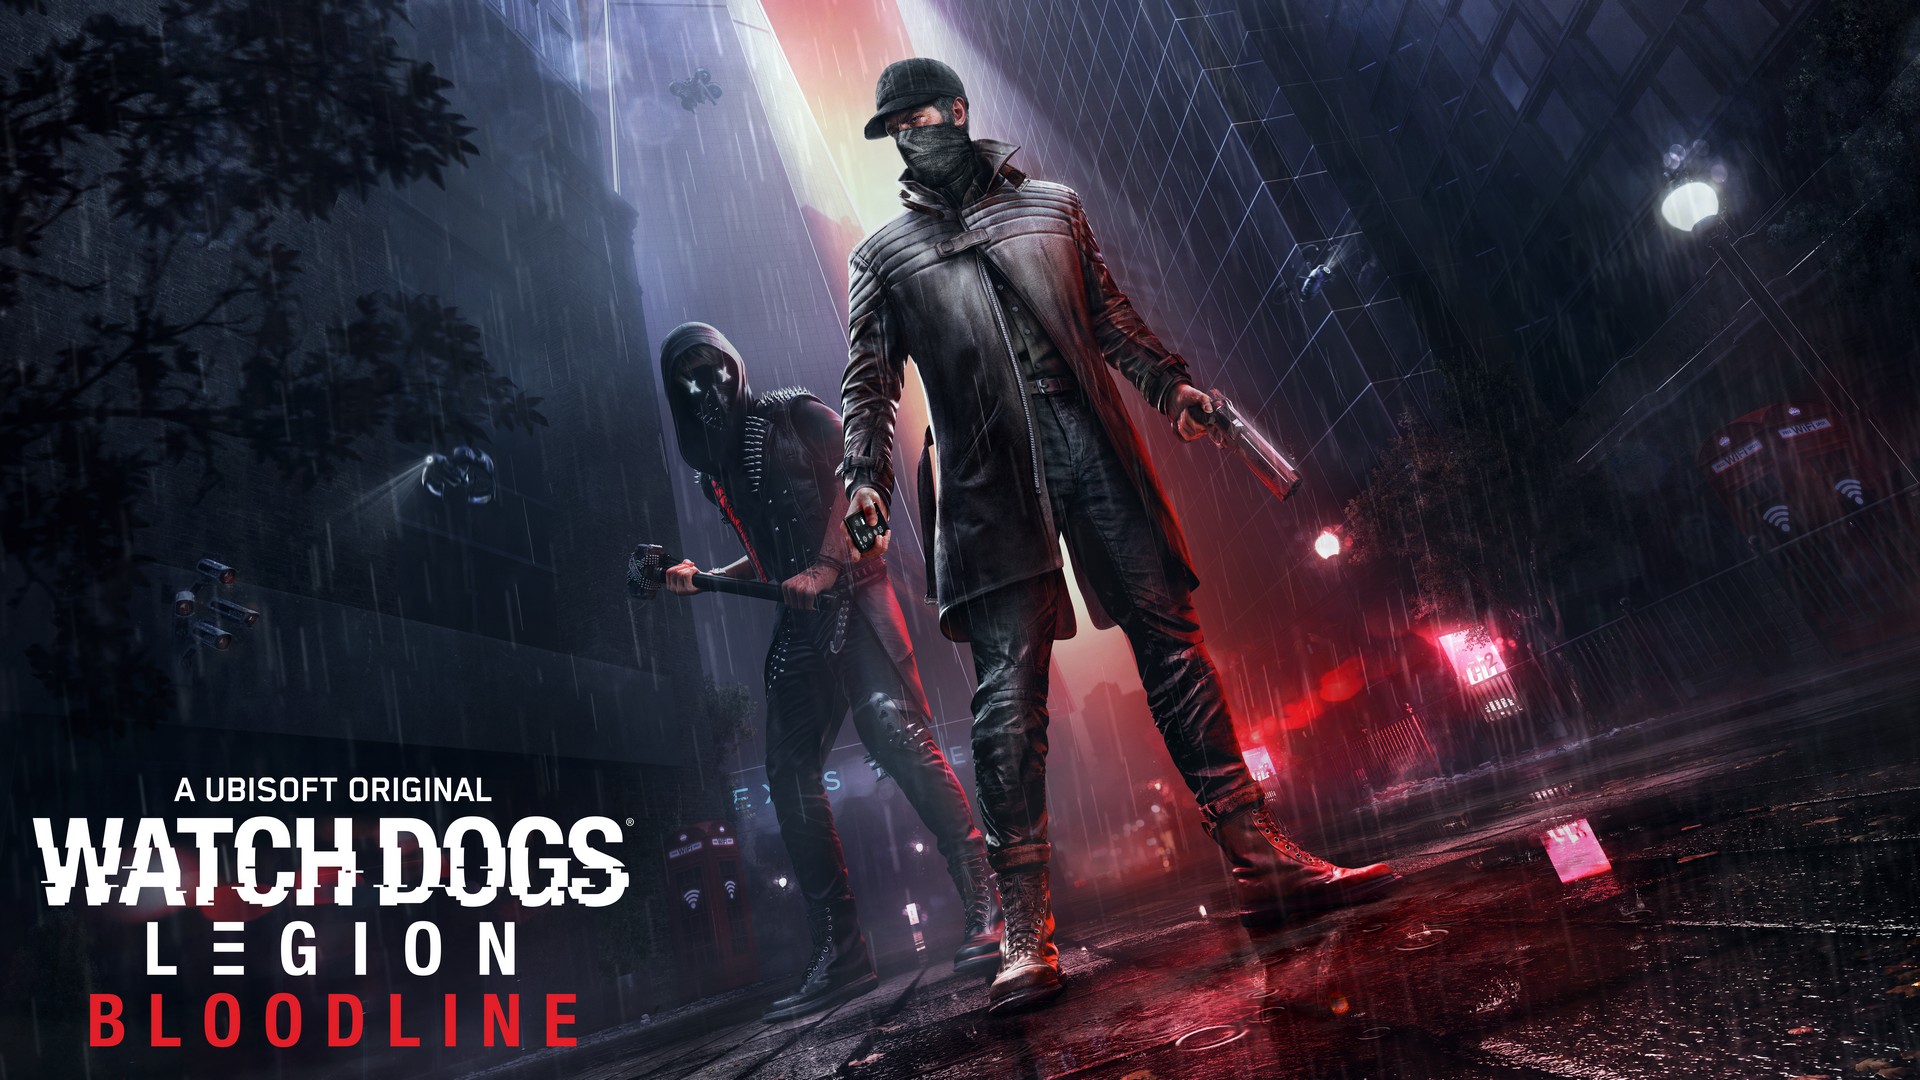 Aiden Pearce & Wrench Are Back On July 6th In Upcoming Expansion, Watch Dogs: Legion – Bloodline